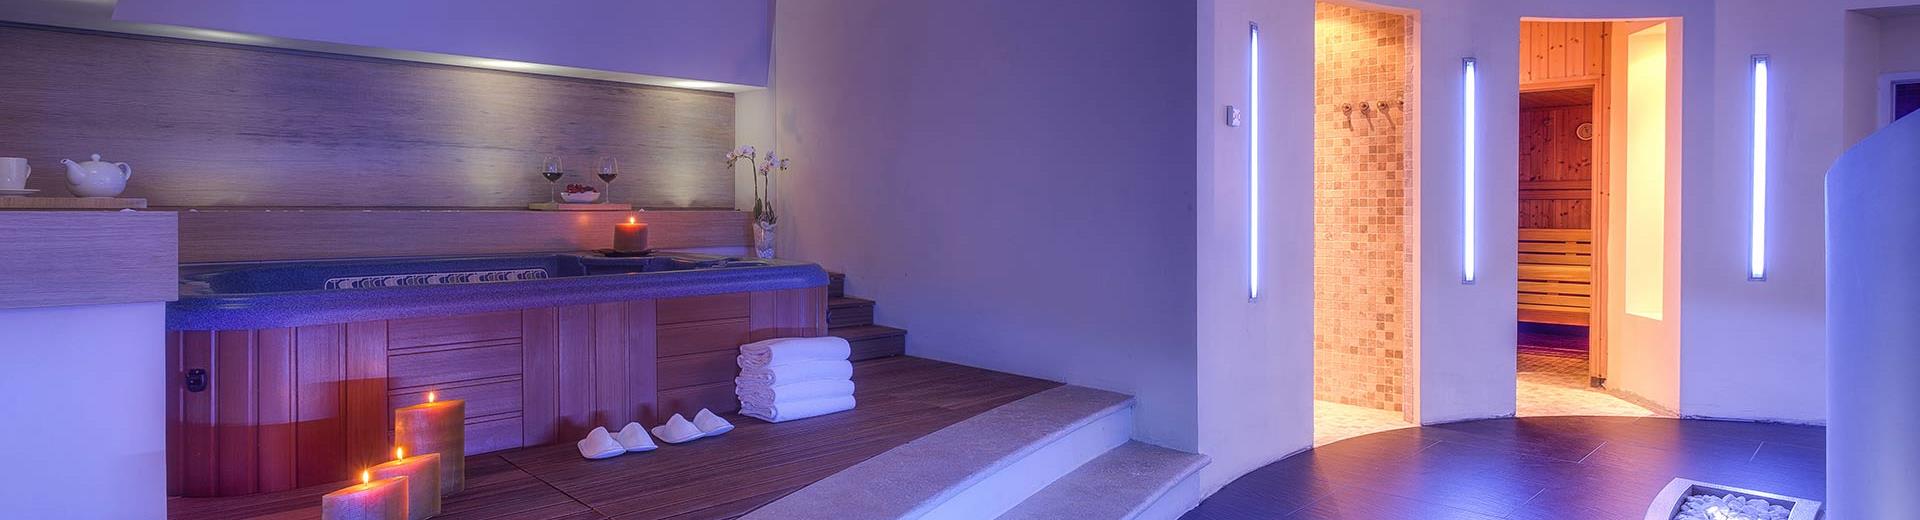 Discover the services in the Wellness center of the Best Western Hotel San Marco and be pampered!